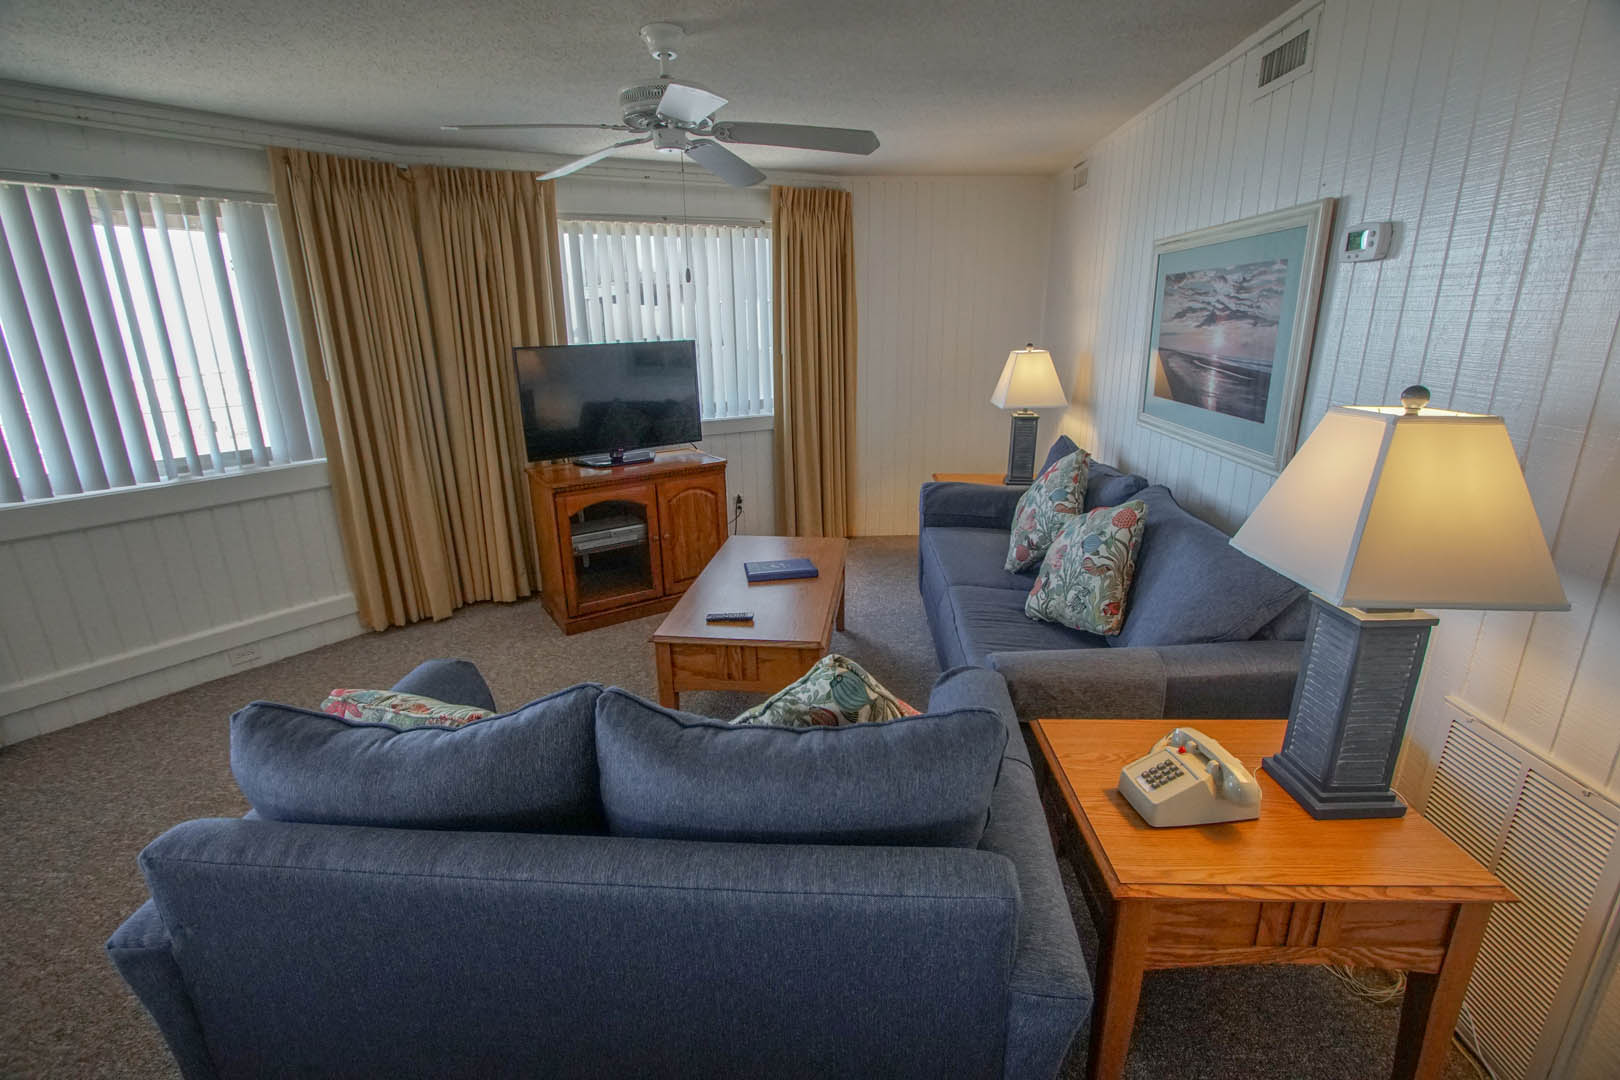 A charming living room area at VRI's Outer Banks Beach Club in North Carolina.